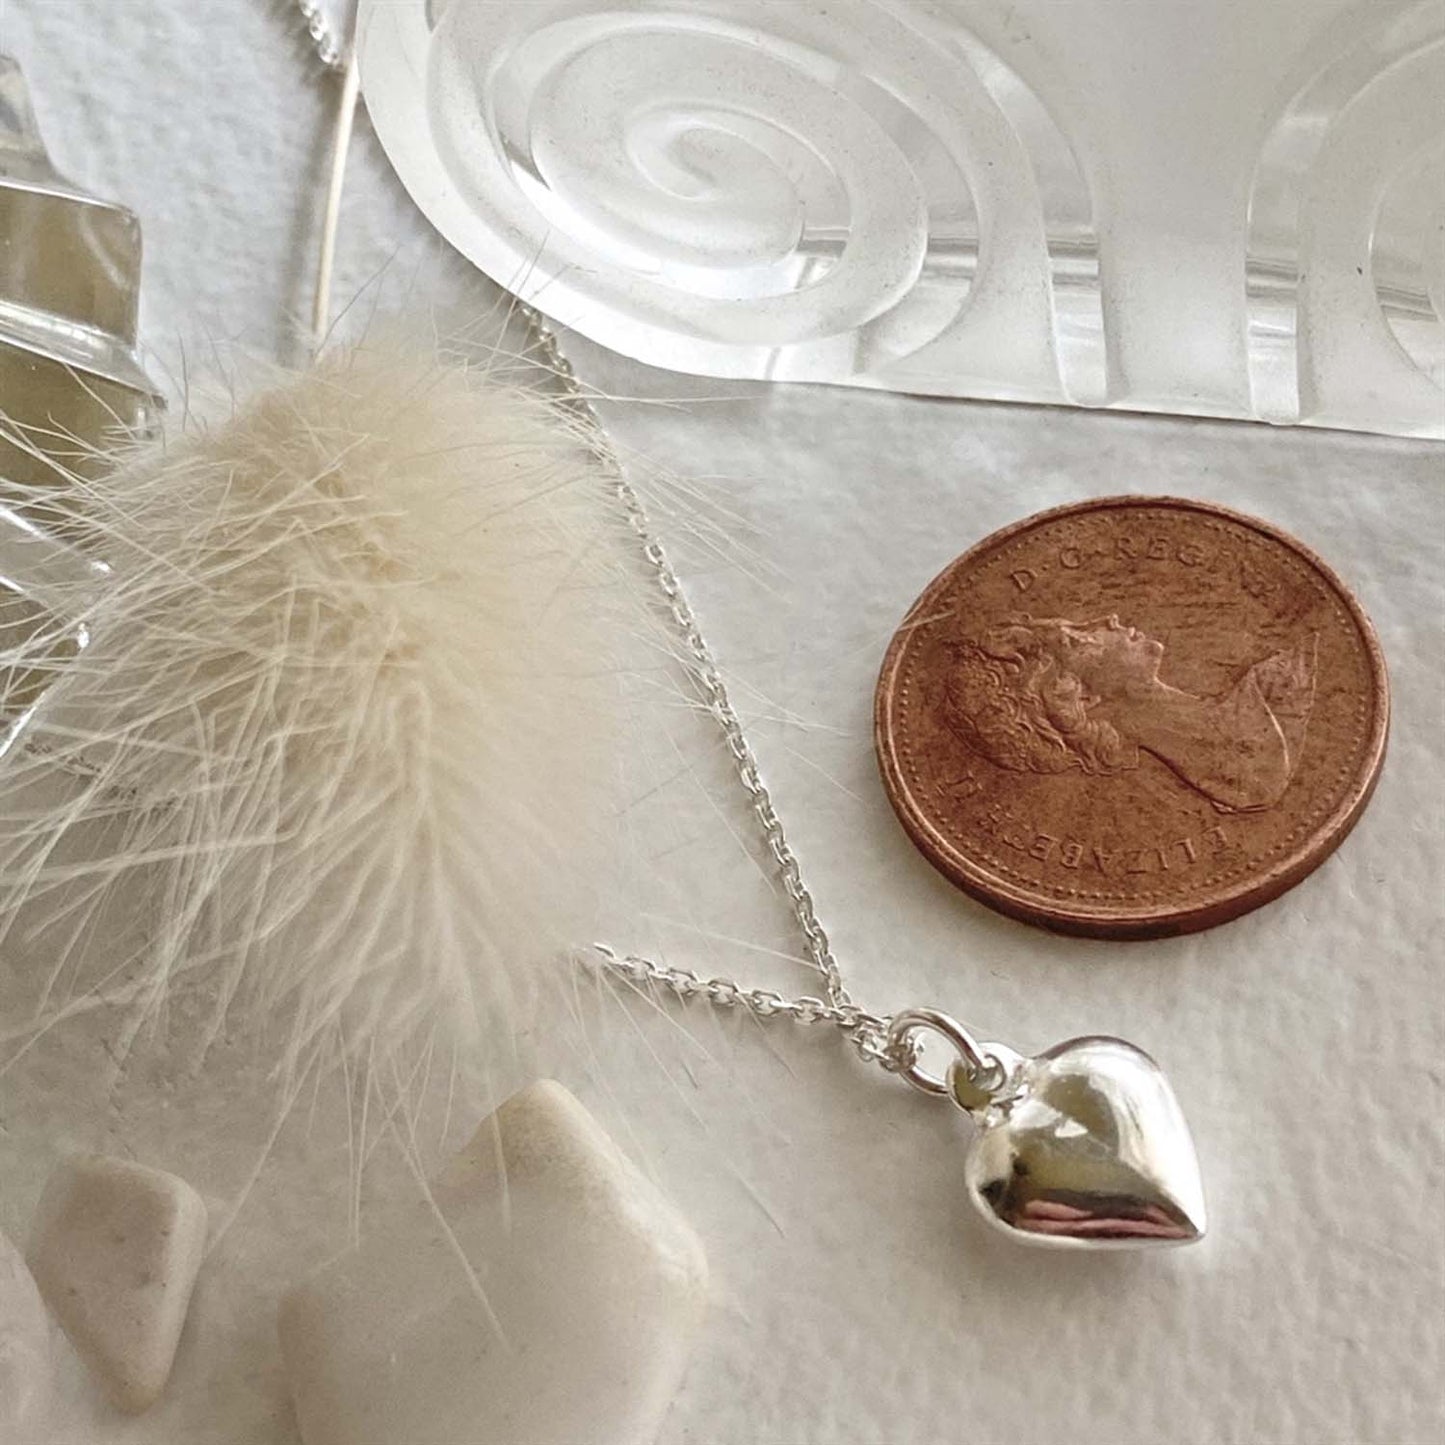 Adore Tiny Heart Charm Necklace In Sterling Silver